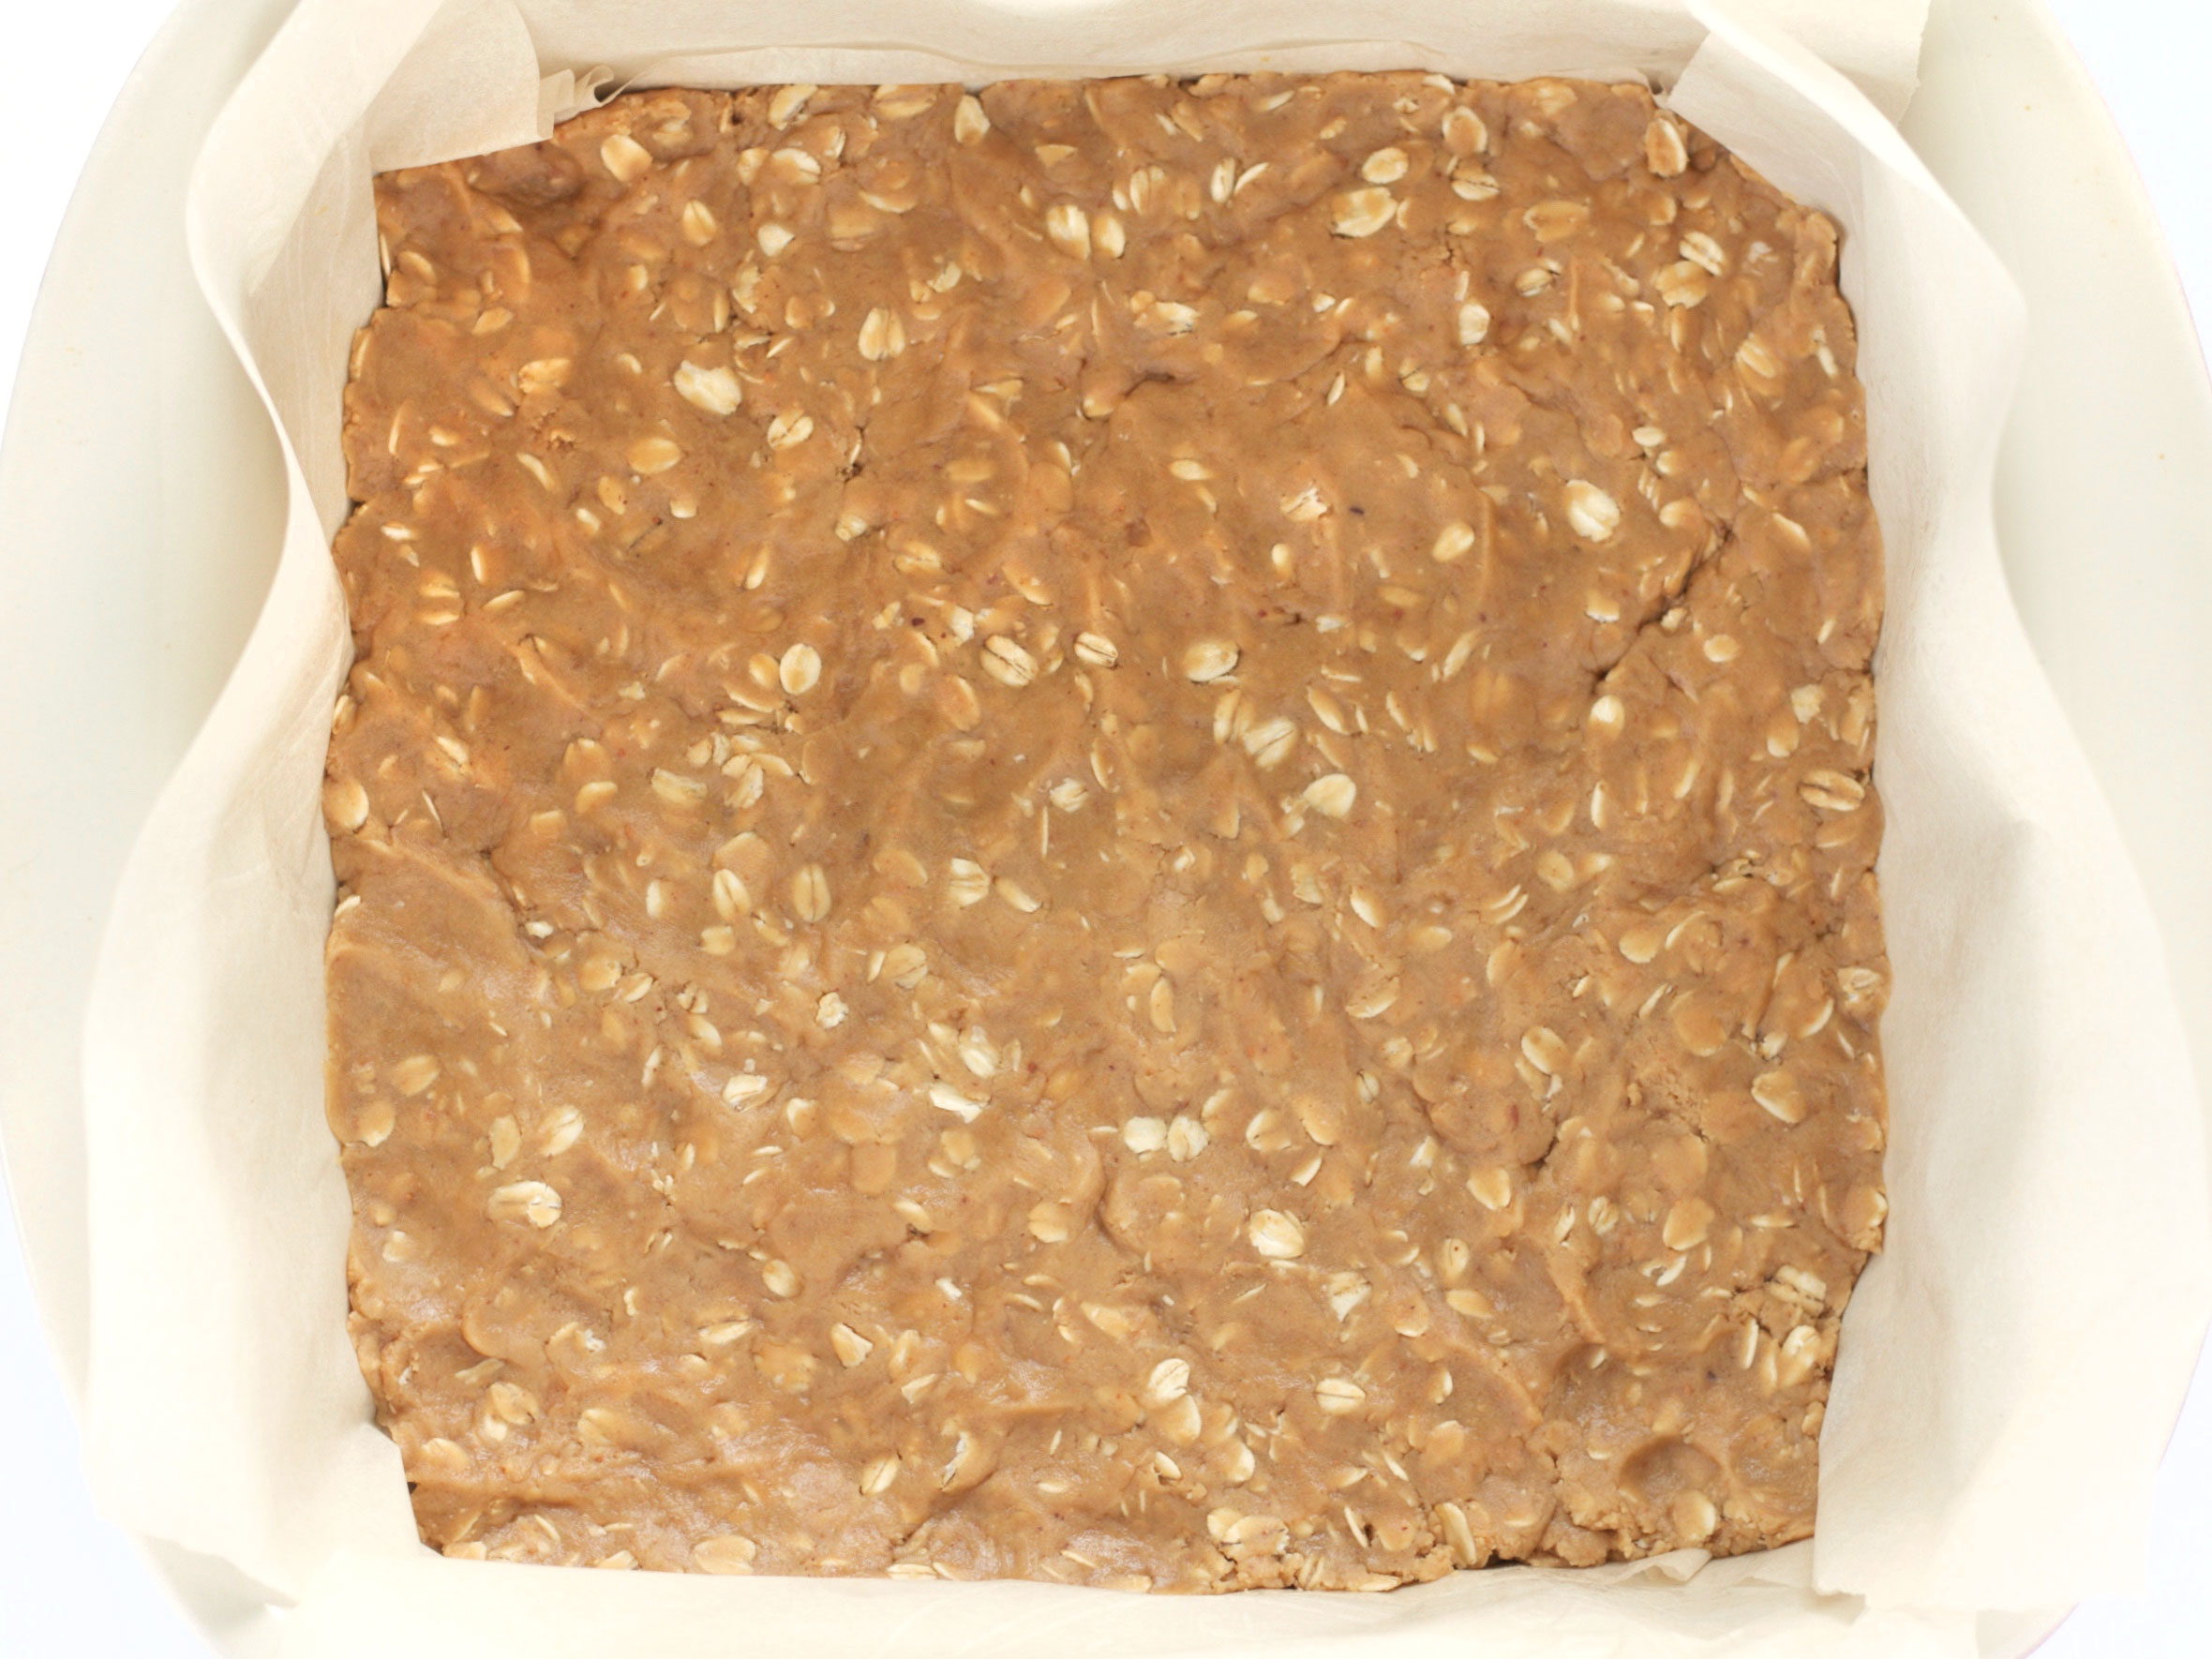 Pressed Cookie Batter in Dish